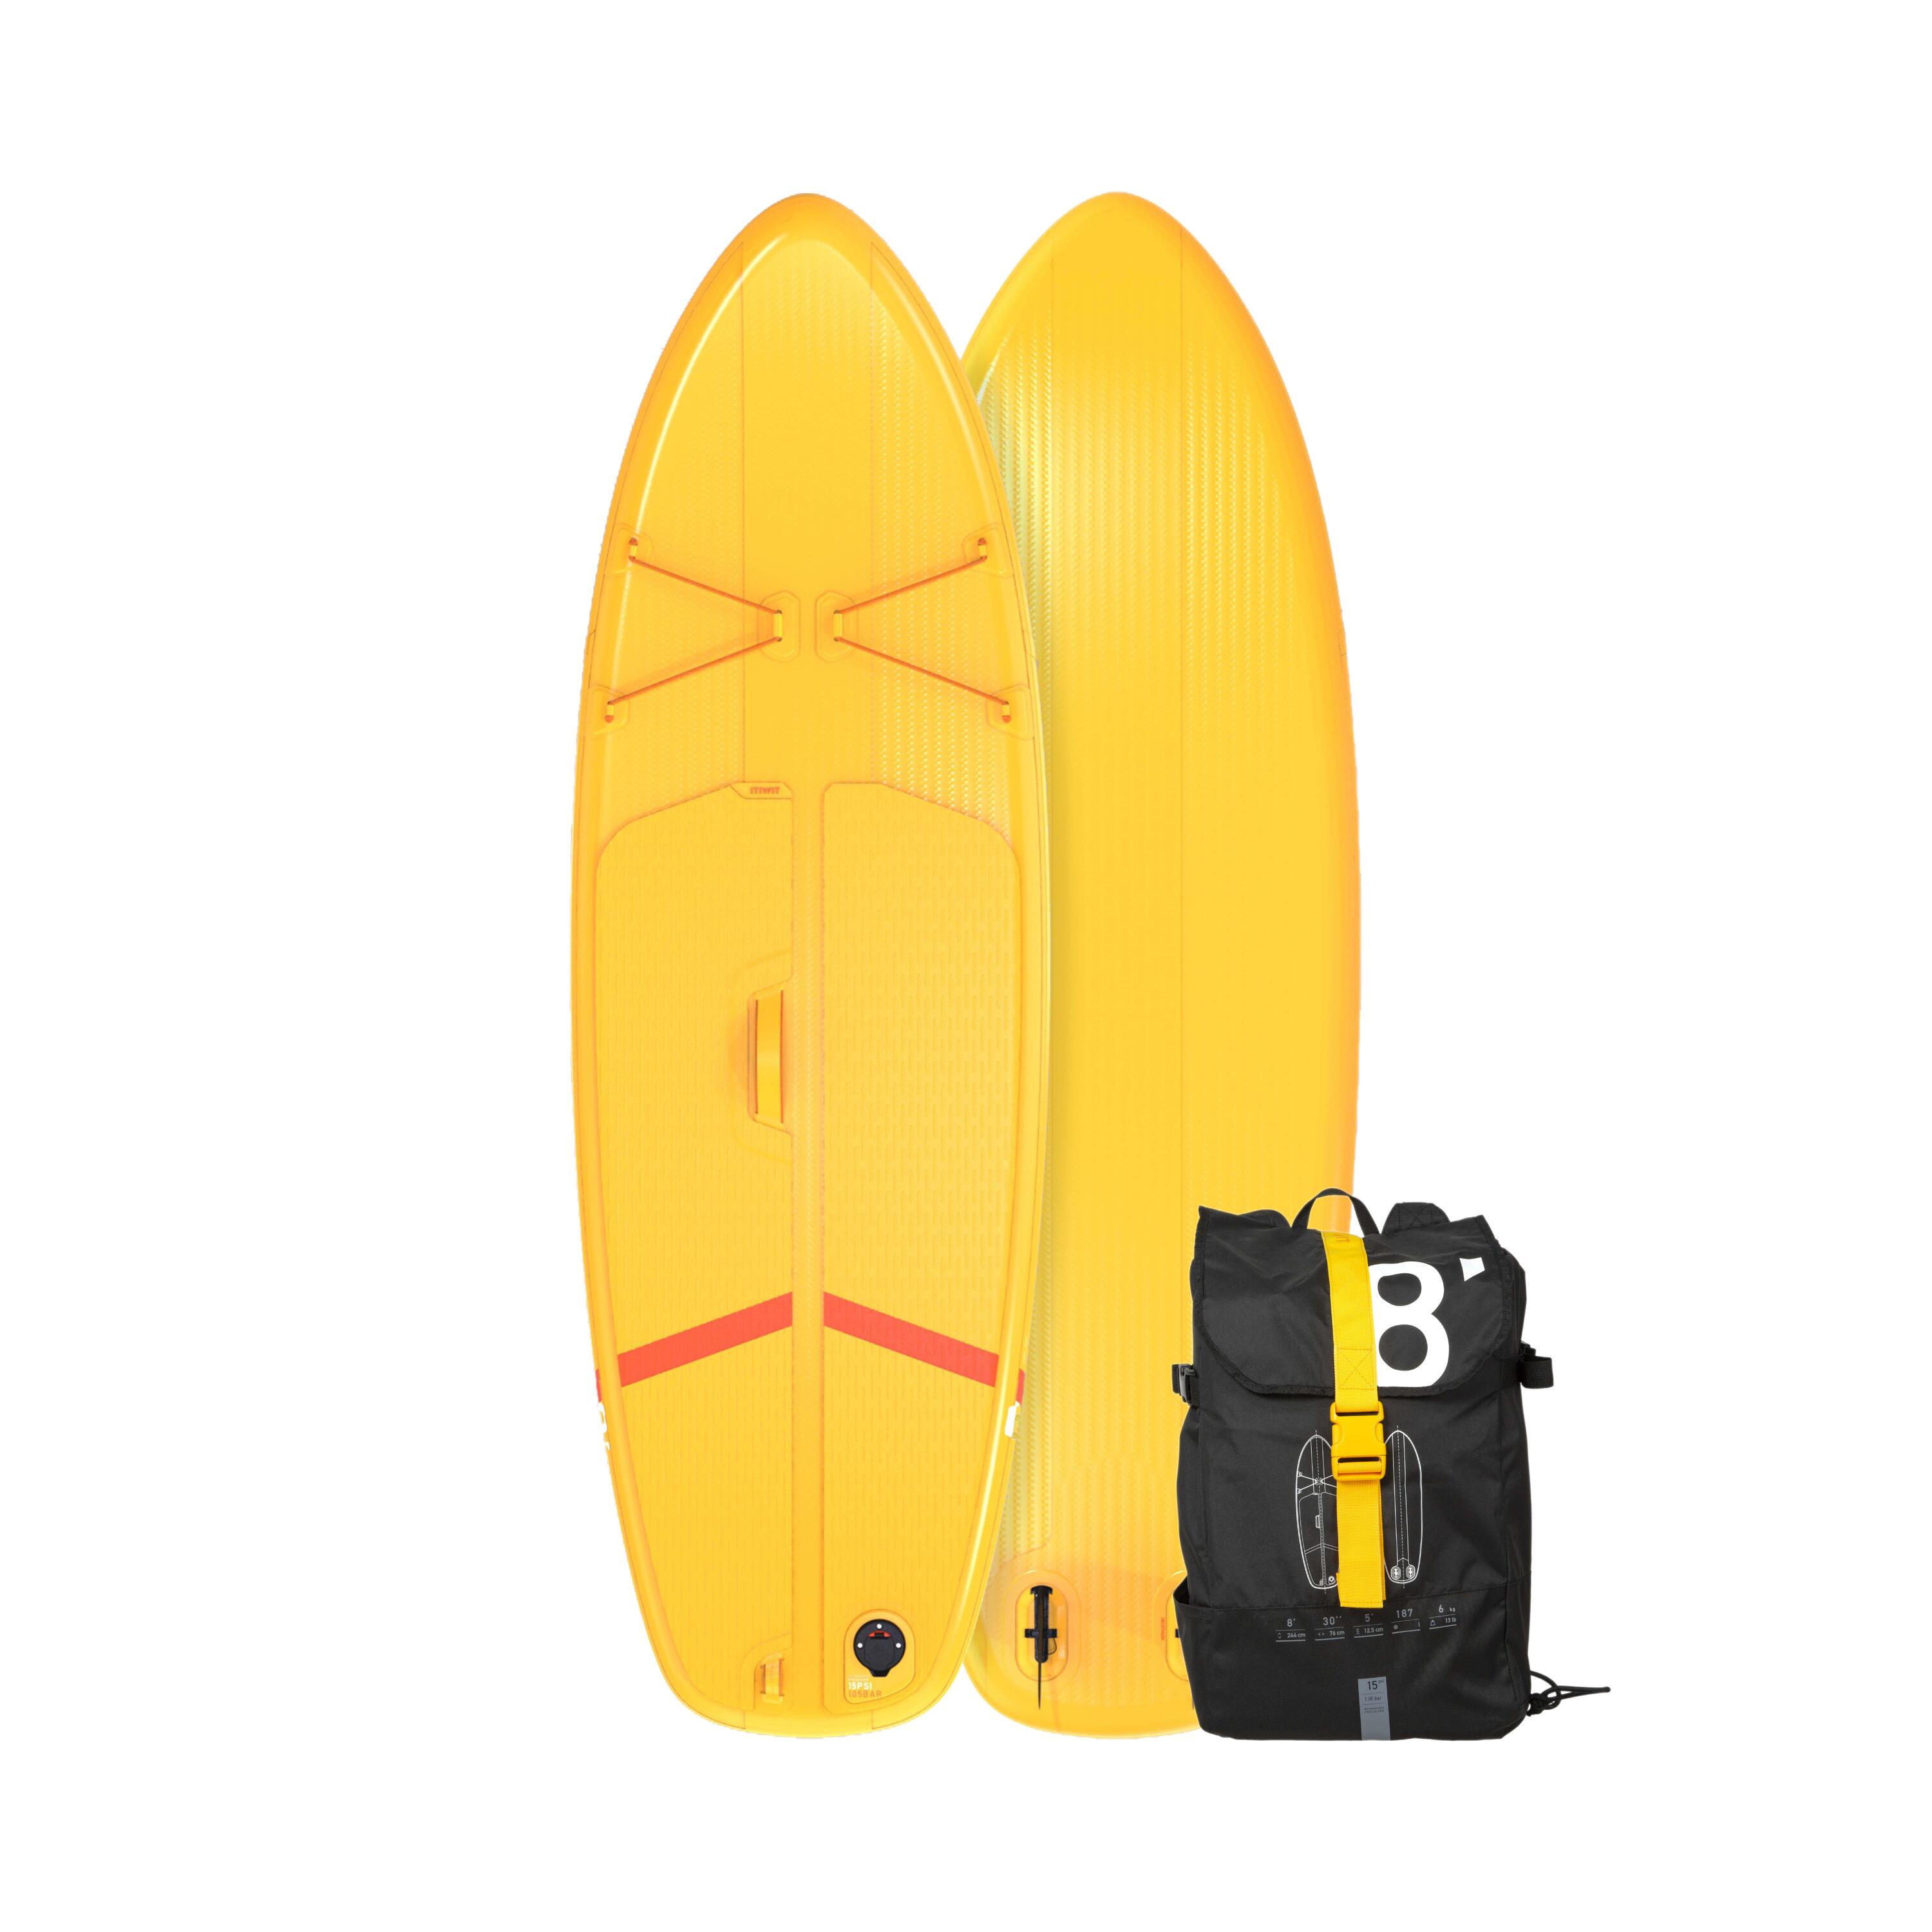 ITIWIT 100 COMPACT 8FT TOURING INFLATABLE STAND-UP PADDLEBOARD - YELLOW